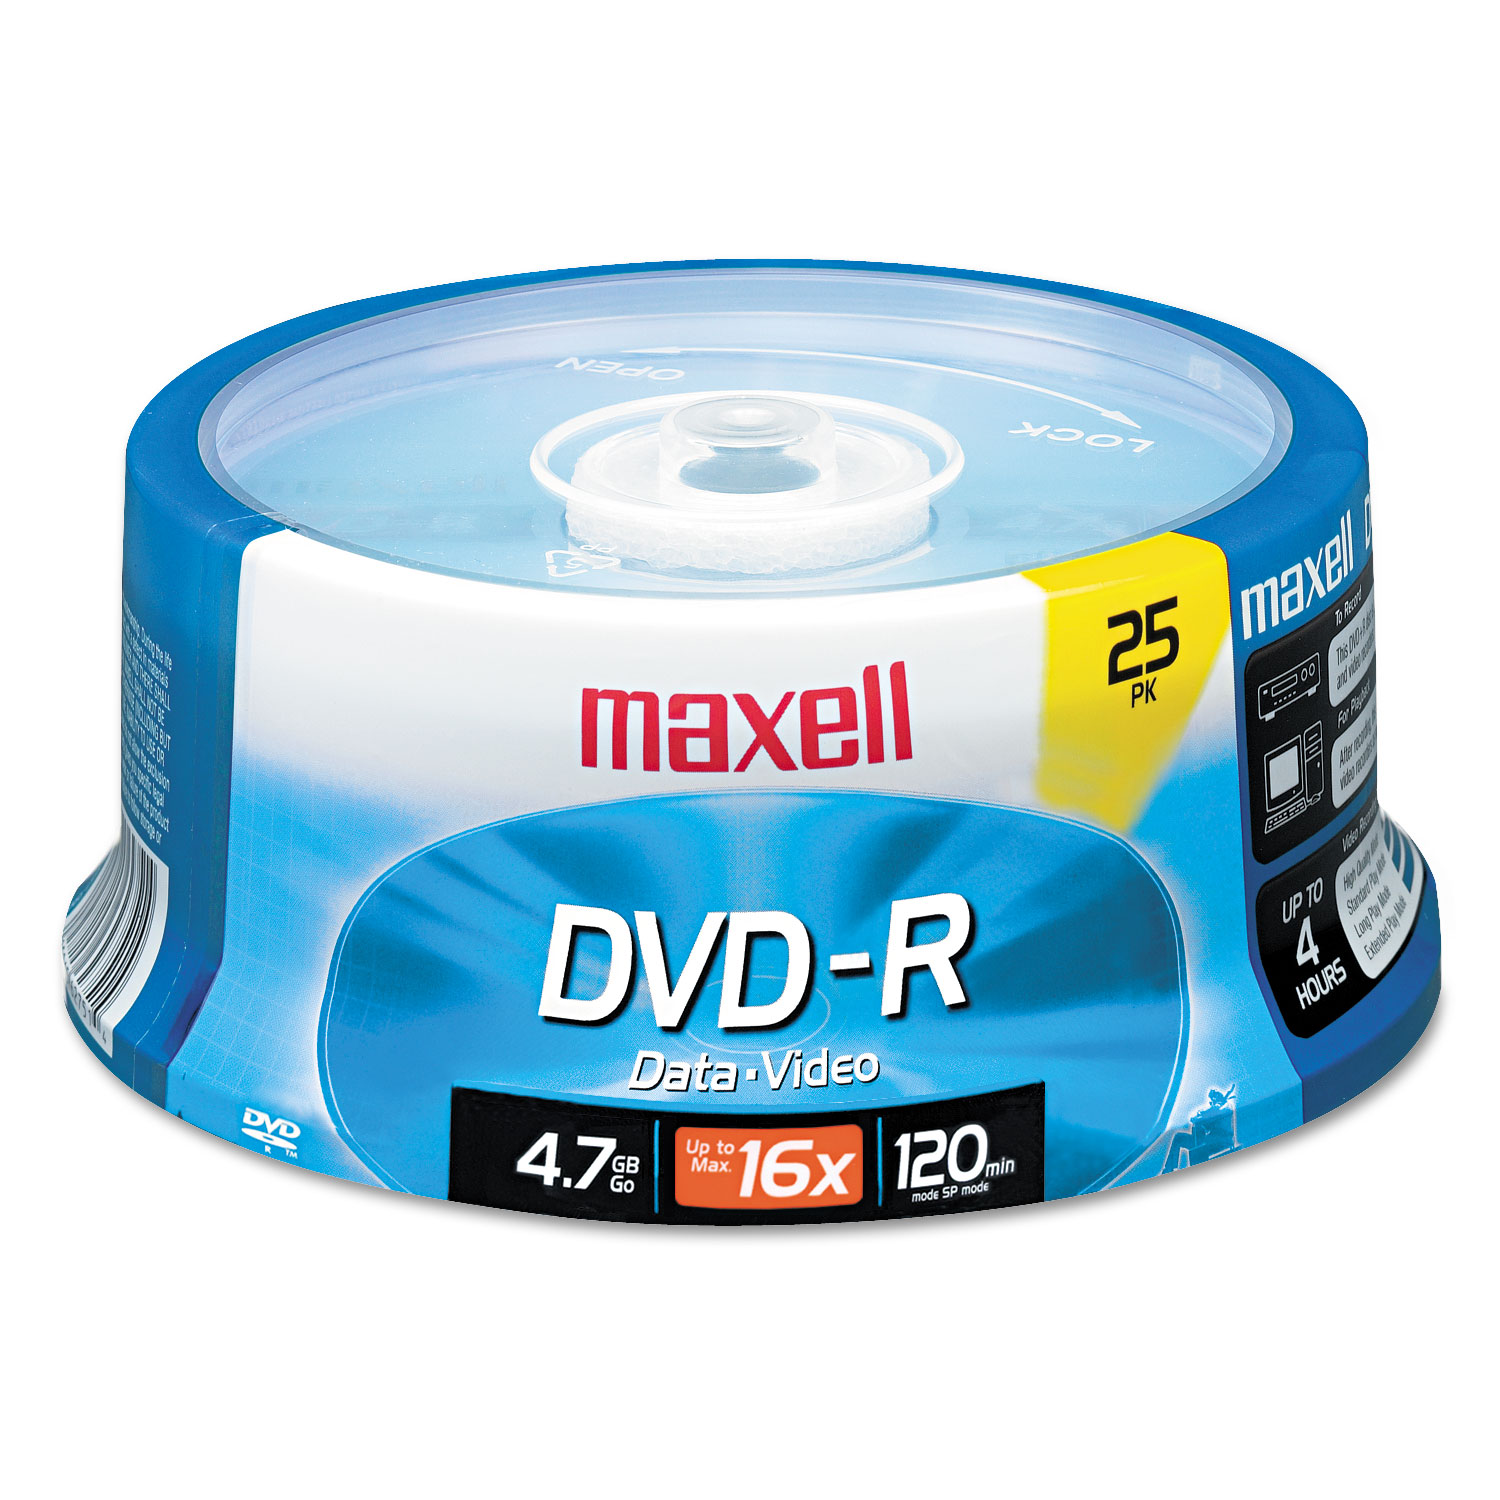  Maxell 638010 DVD-R Discs, 4.7GB, 16x, Spindle, Gold, 25/Pack (MAX638010) 